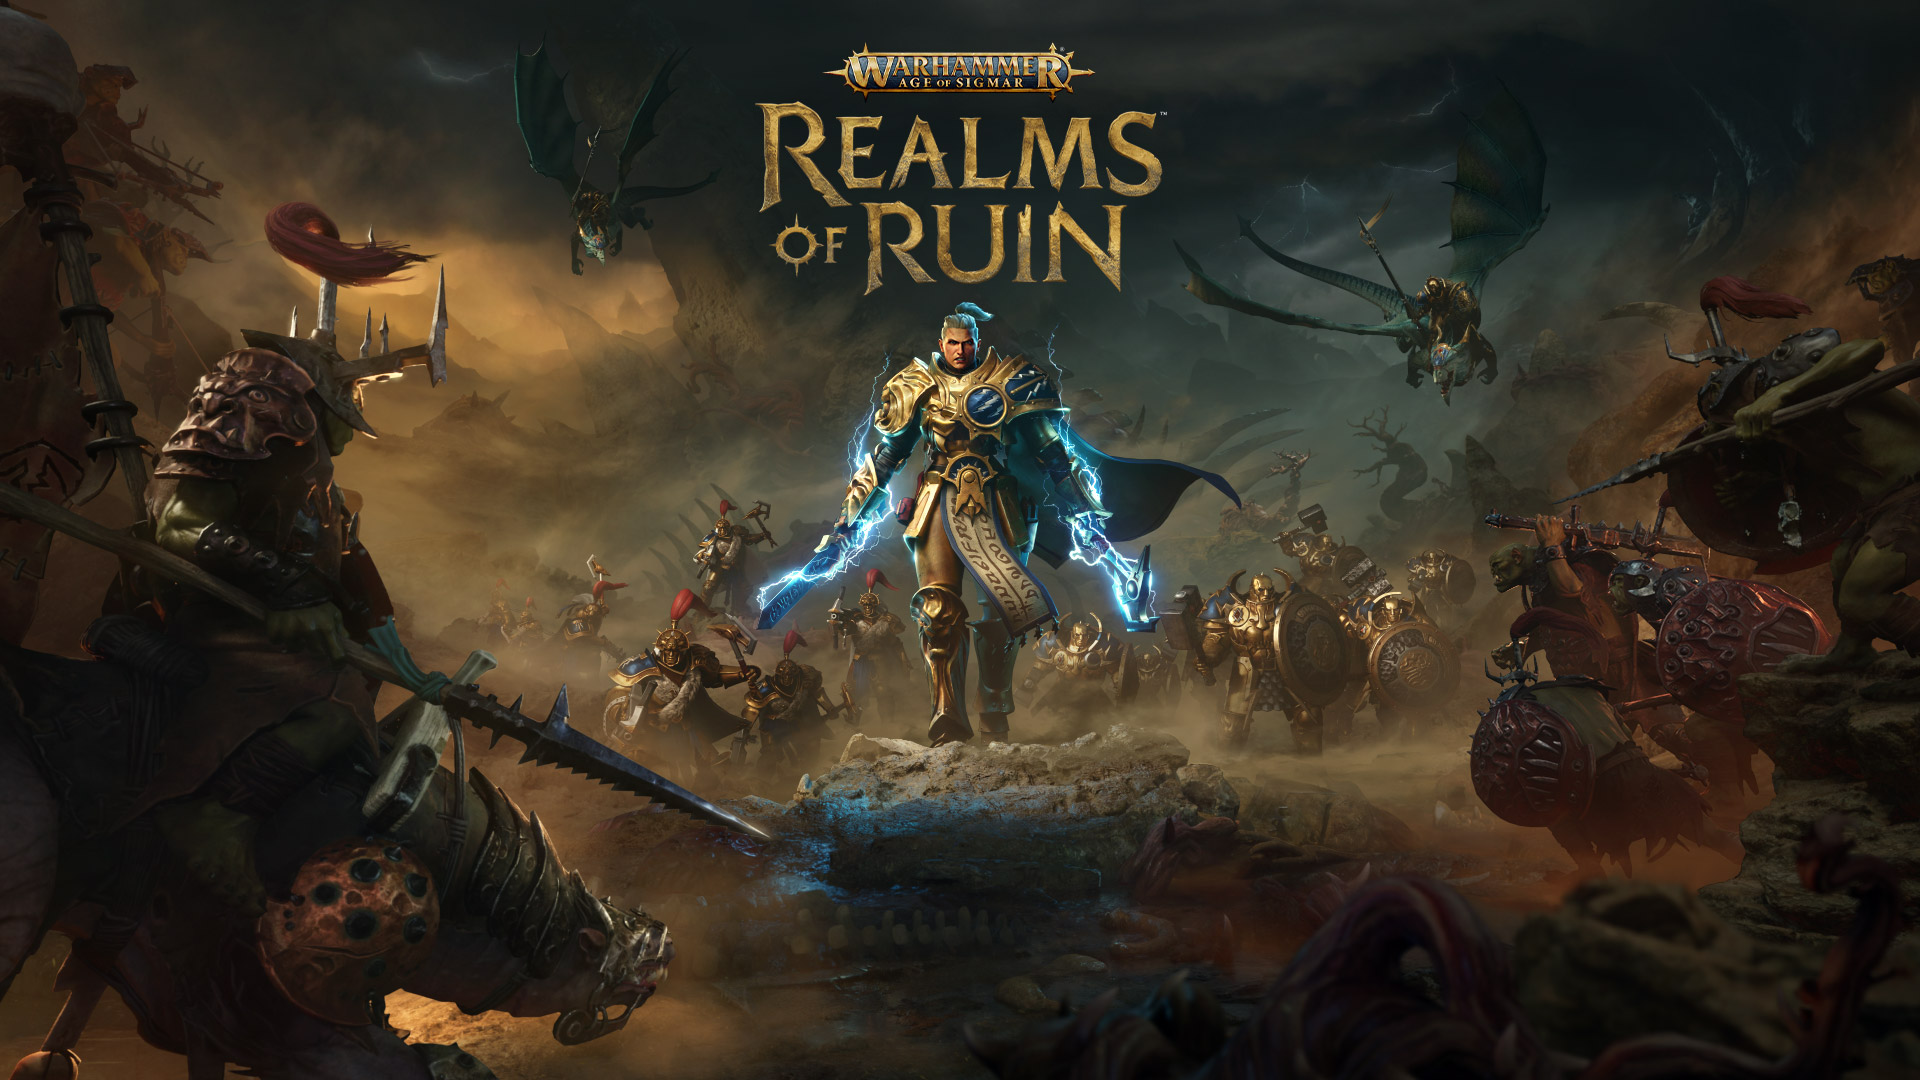 Warhammer Age of Sigmar: Realms of Ruin announced with reveal trailer